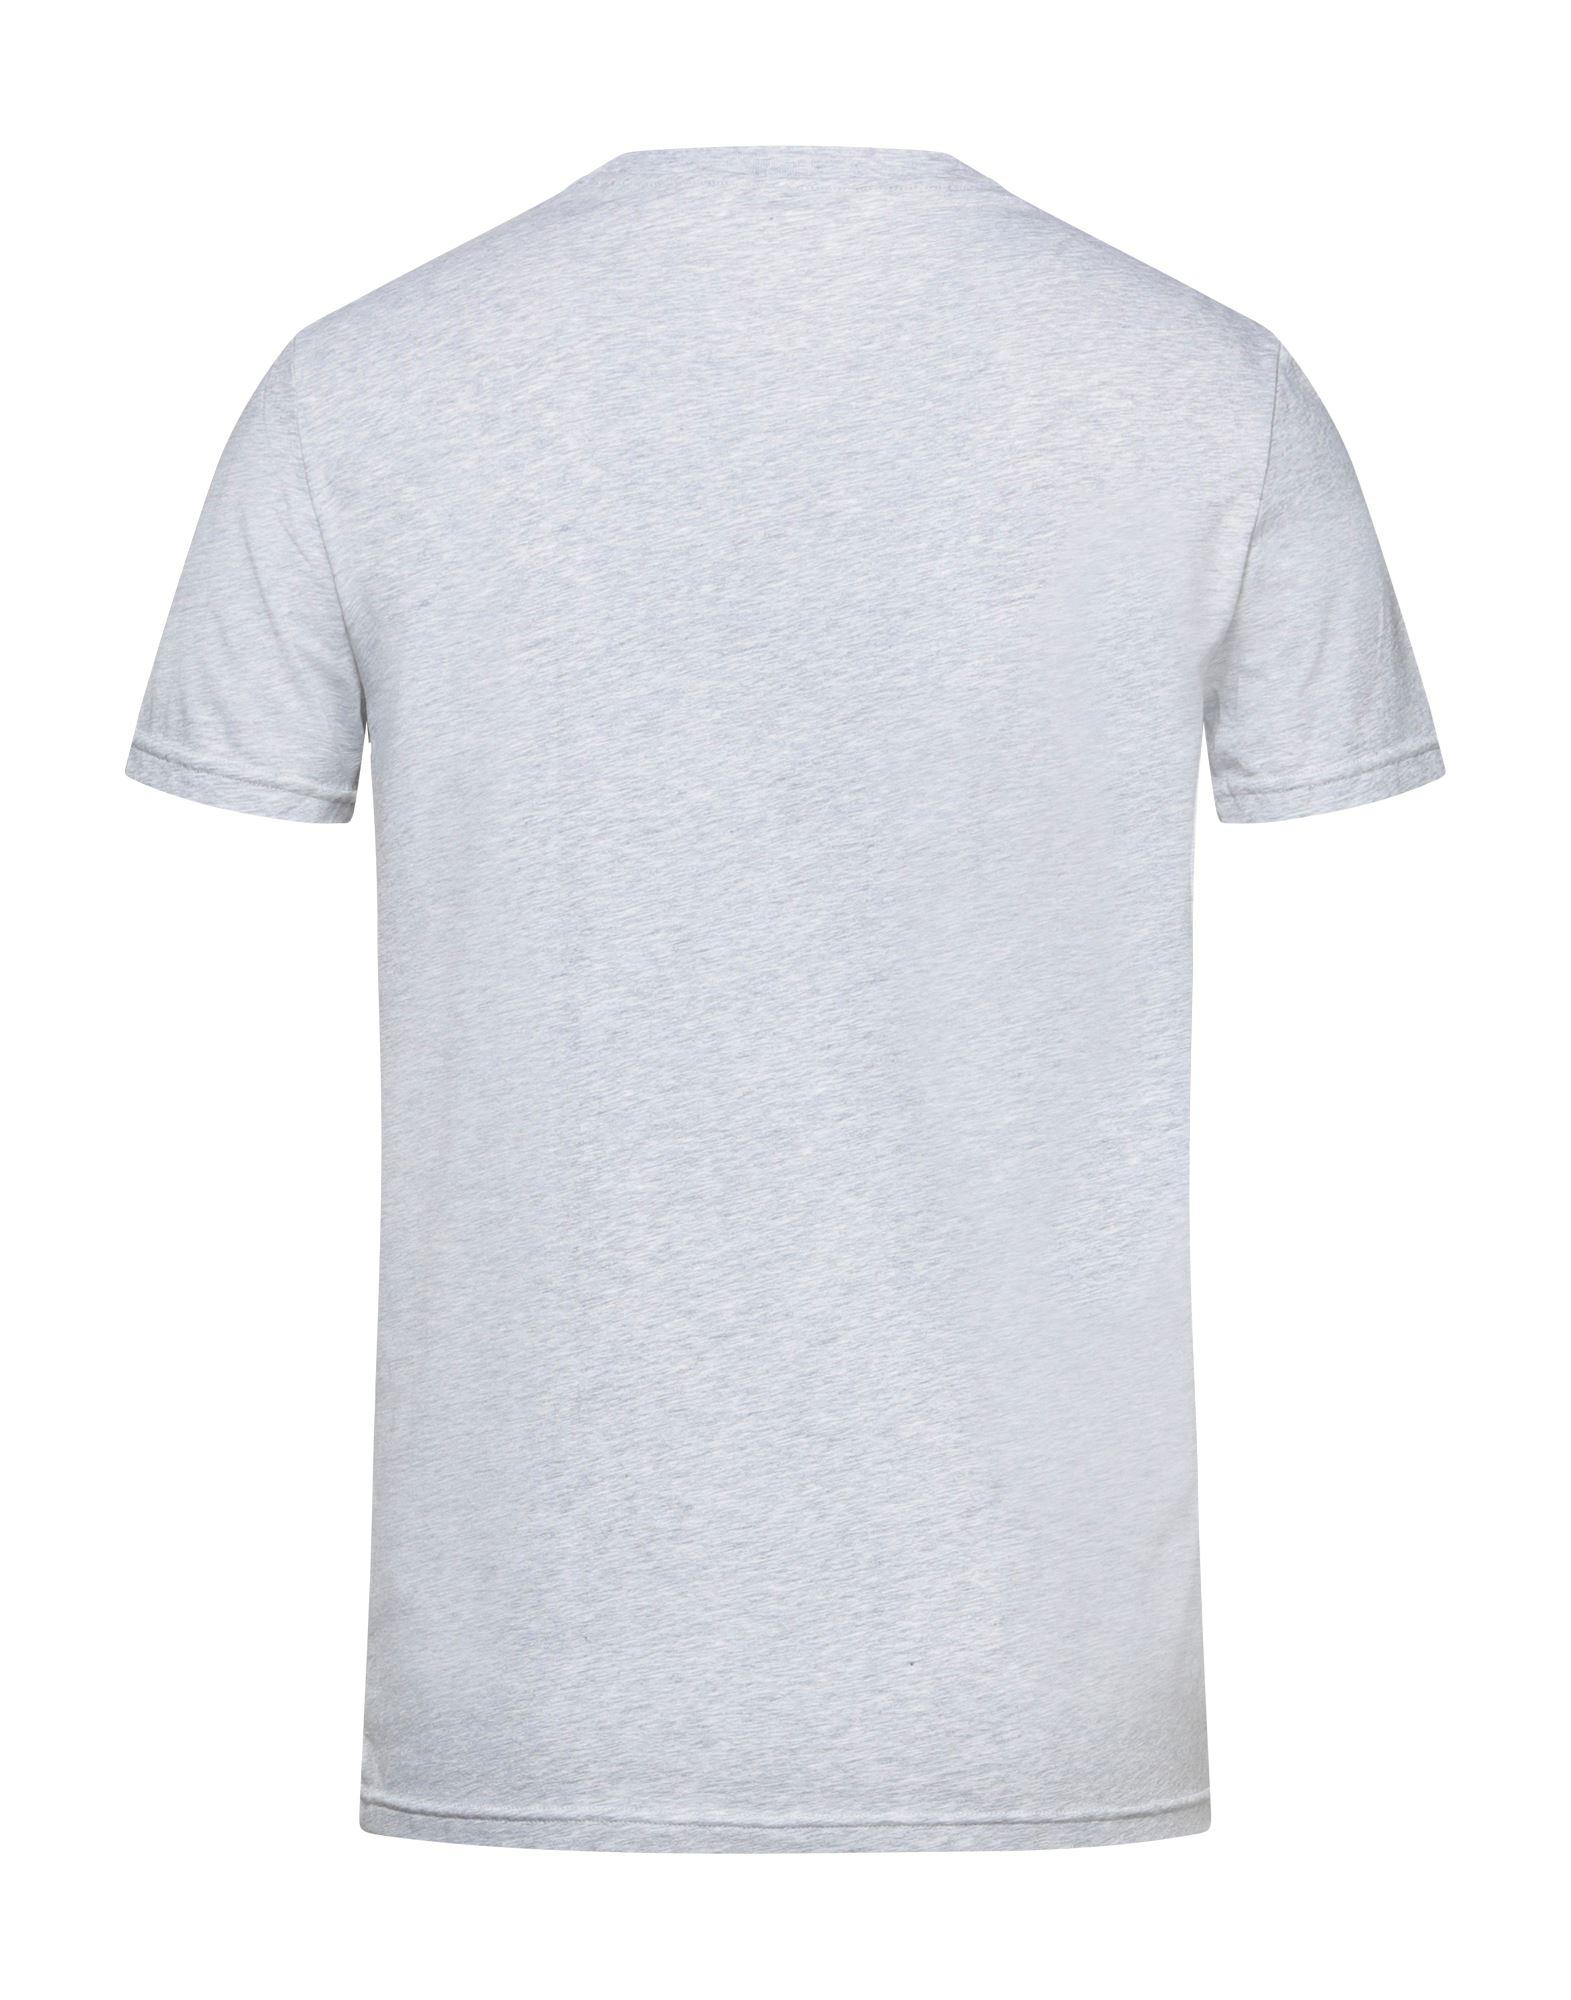 DSquared² Cotton Undershirt in Light Grey (Gray) for Men - Lyst